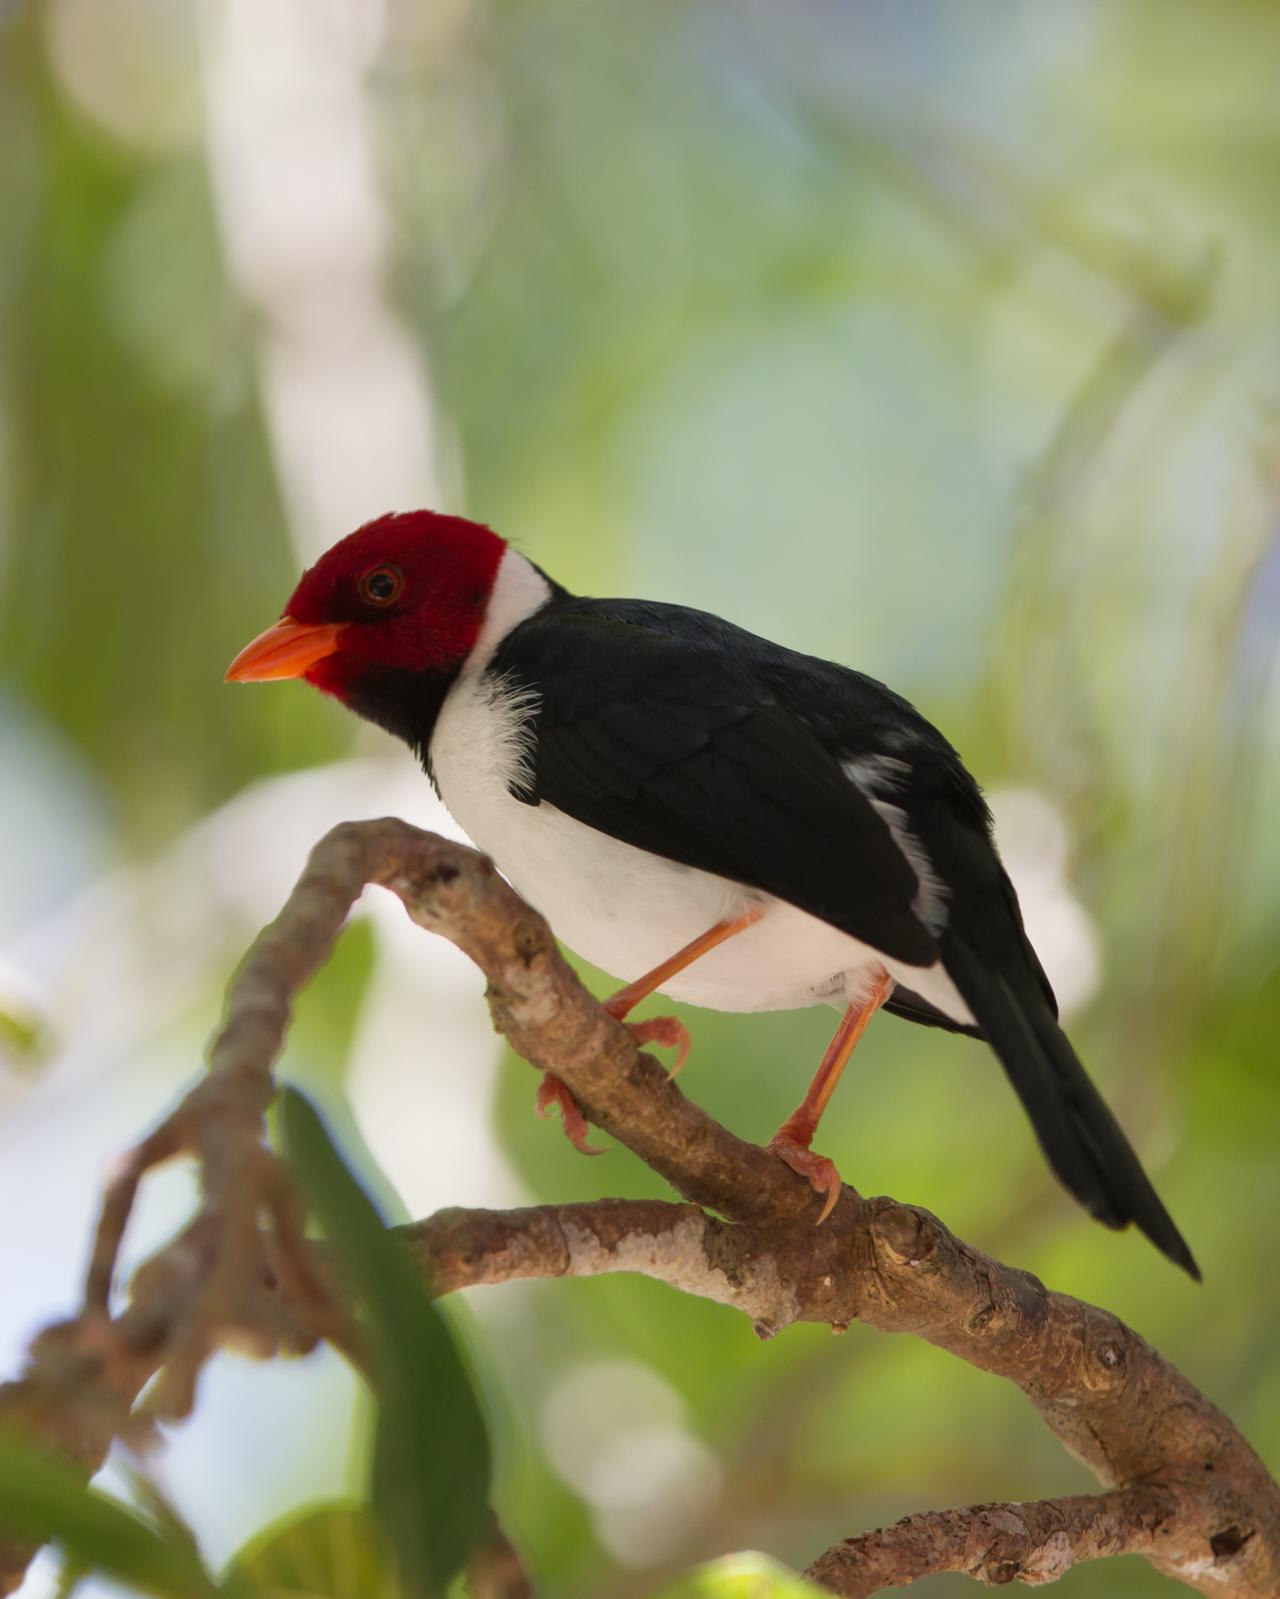 Yellow-billed Cardinal Photo by Kevin Berkoff